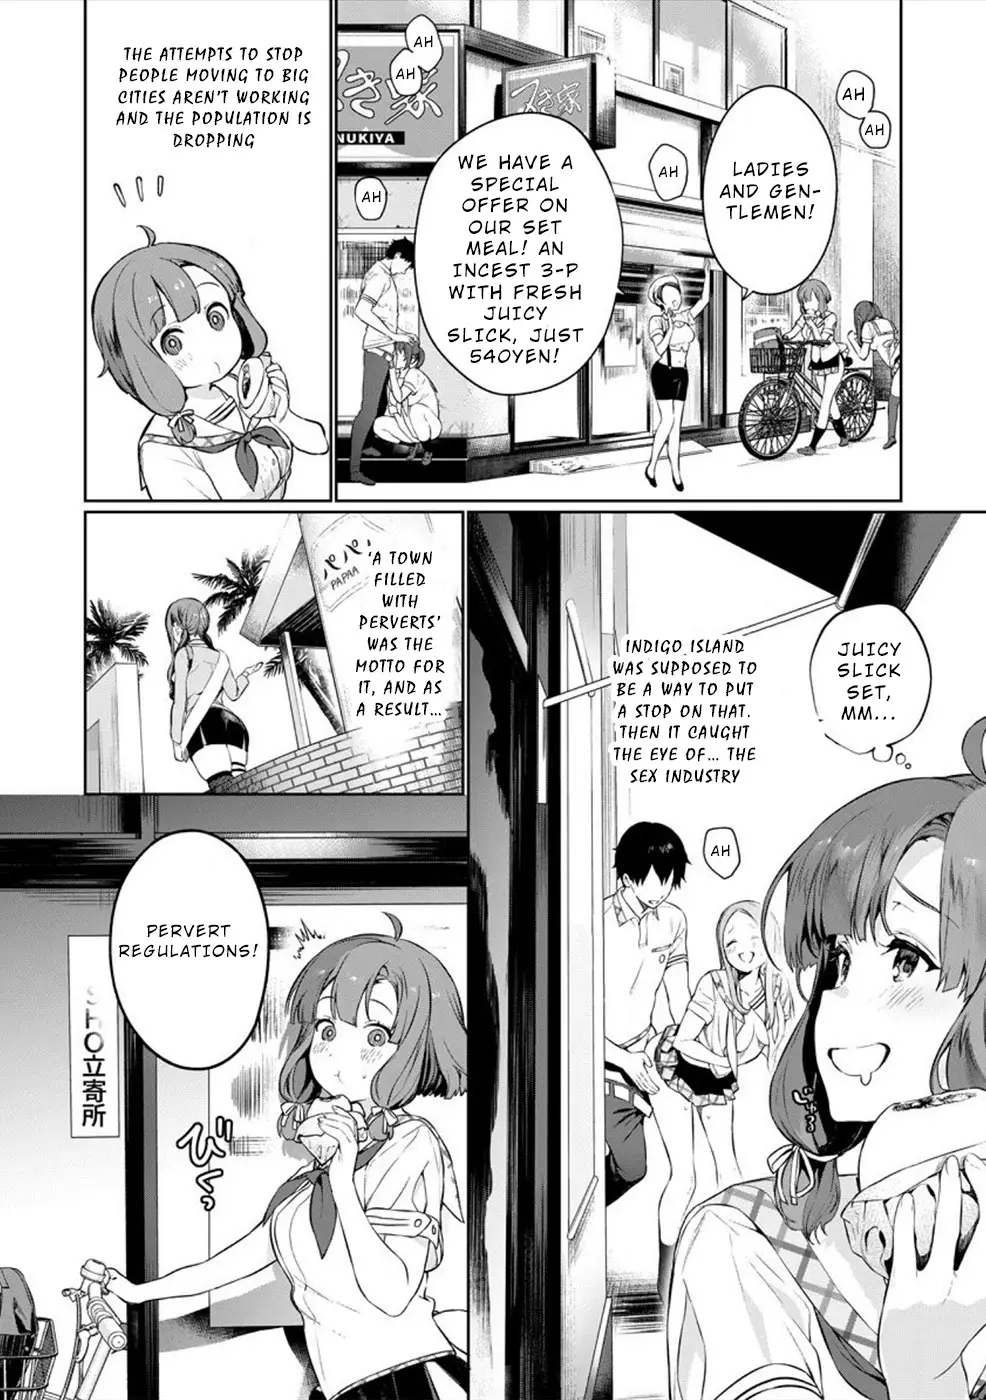 Nukita L - I Live On An Island Straight From A Fap Game, What On Earth Should I Do? - 1 page 10